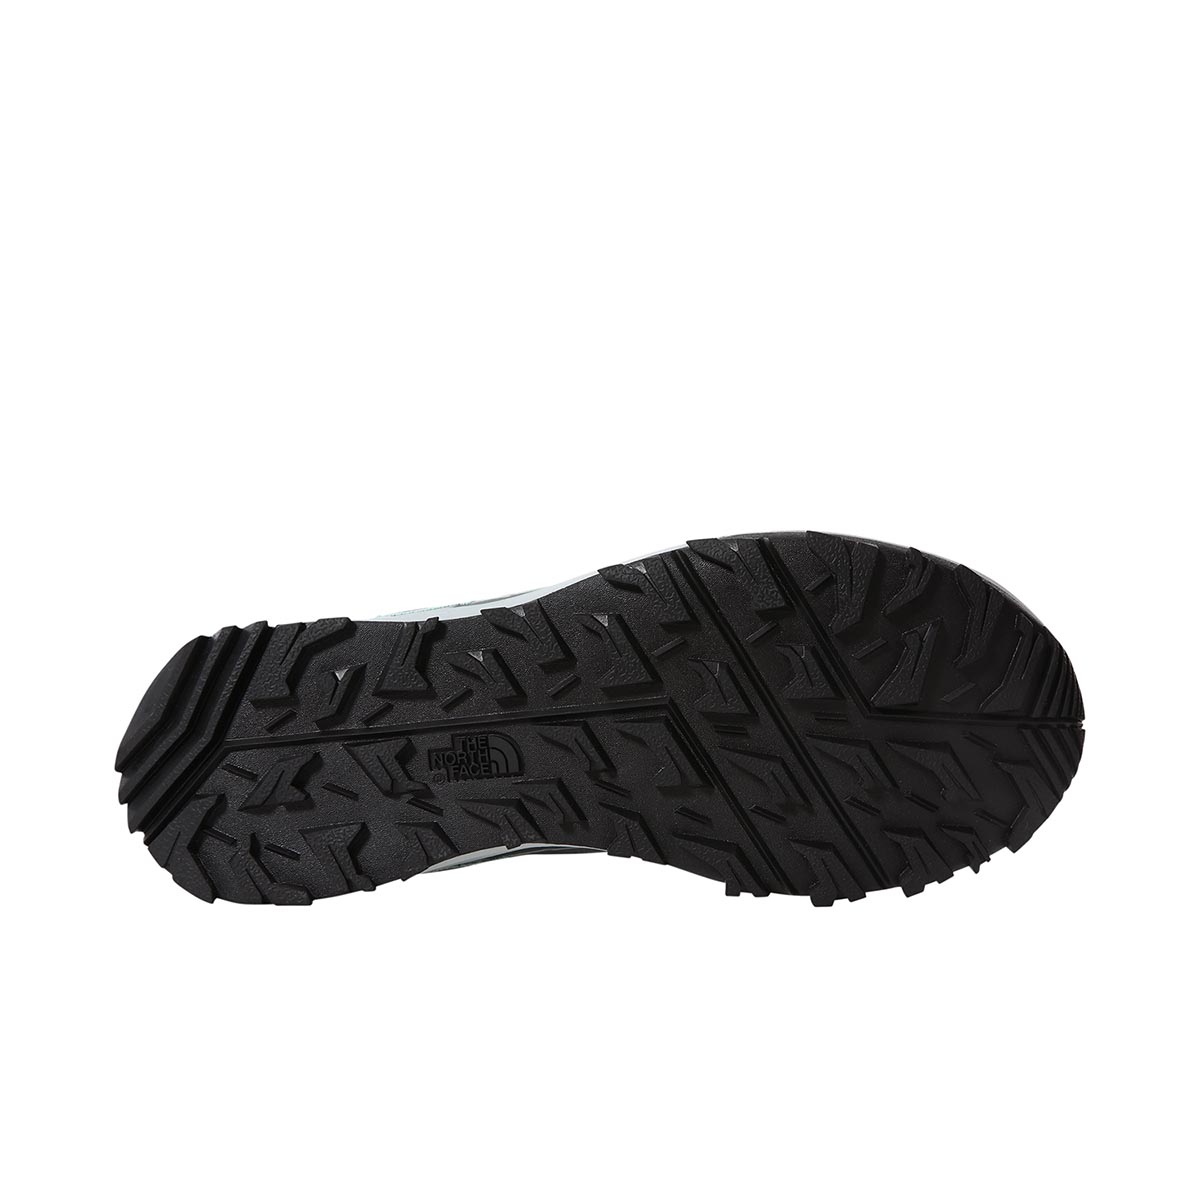 THE NORTH FACE - LITEWAVE FUTURELIGHT SHOES